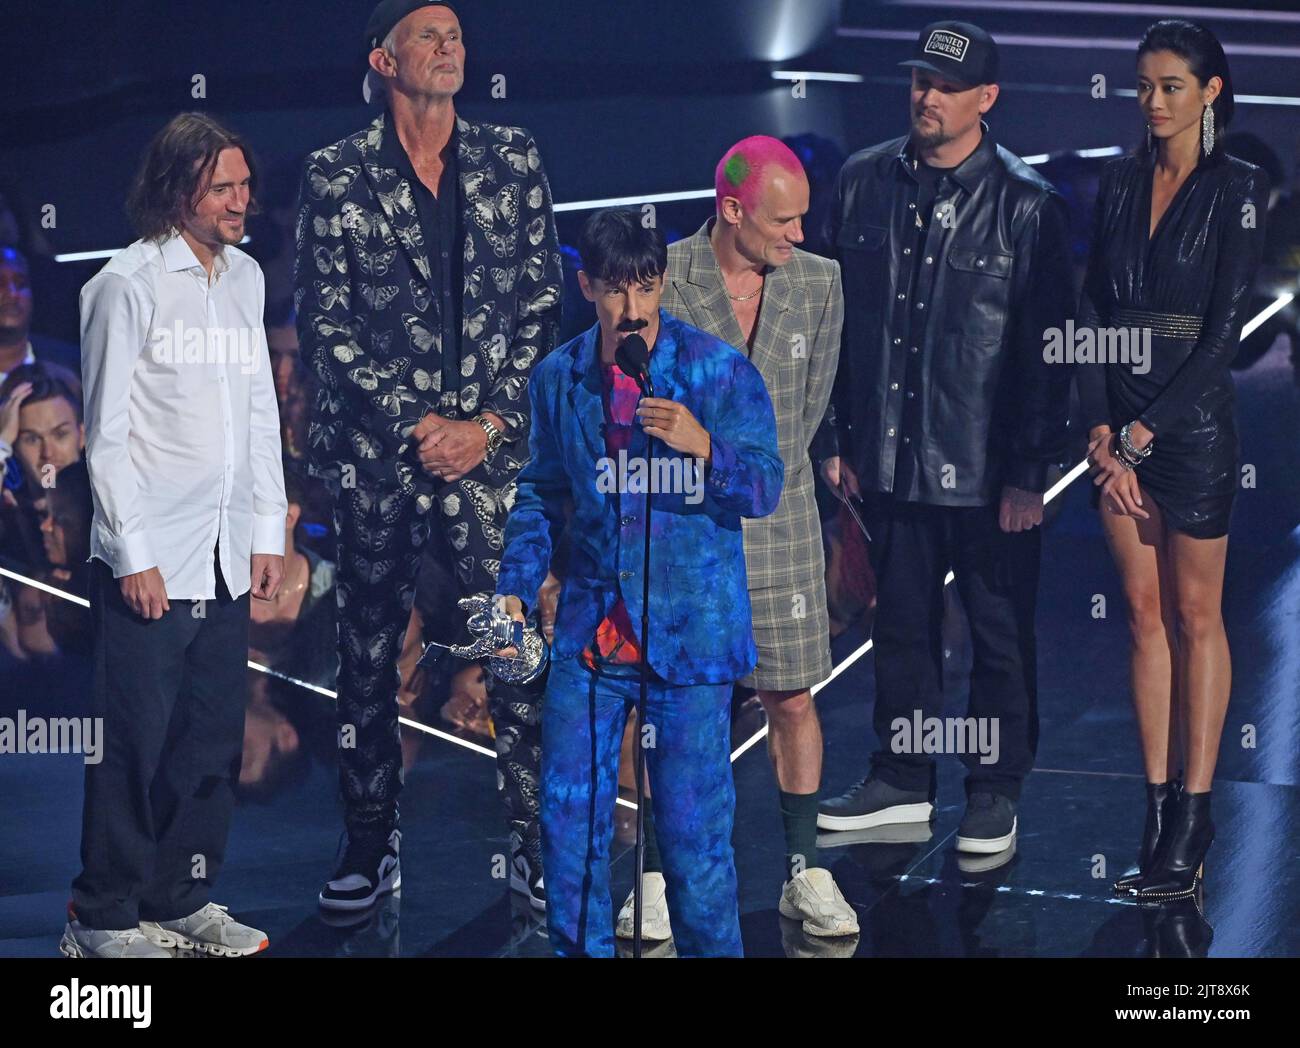 Anthony Kiedis with (left to right) John Frusciante, Chad Smith and Flea of Red Hot Chili Peppers accept the Best Rock award for 'Black Summer' on stage at the MTV Video Music Awards 2022 held at the Prudential Center in Newark, New Jersey. Picture date: Sunday August 28, 2022. Stock Photo